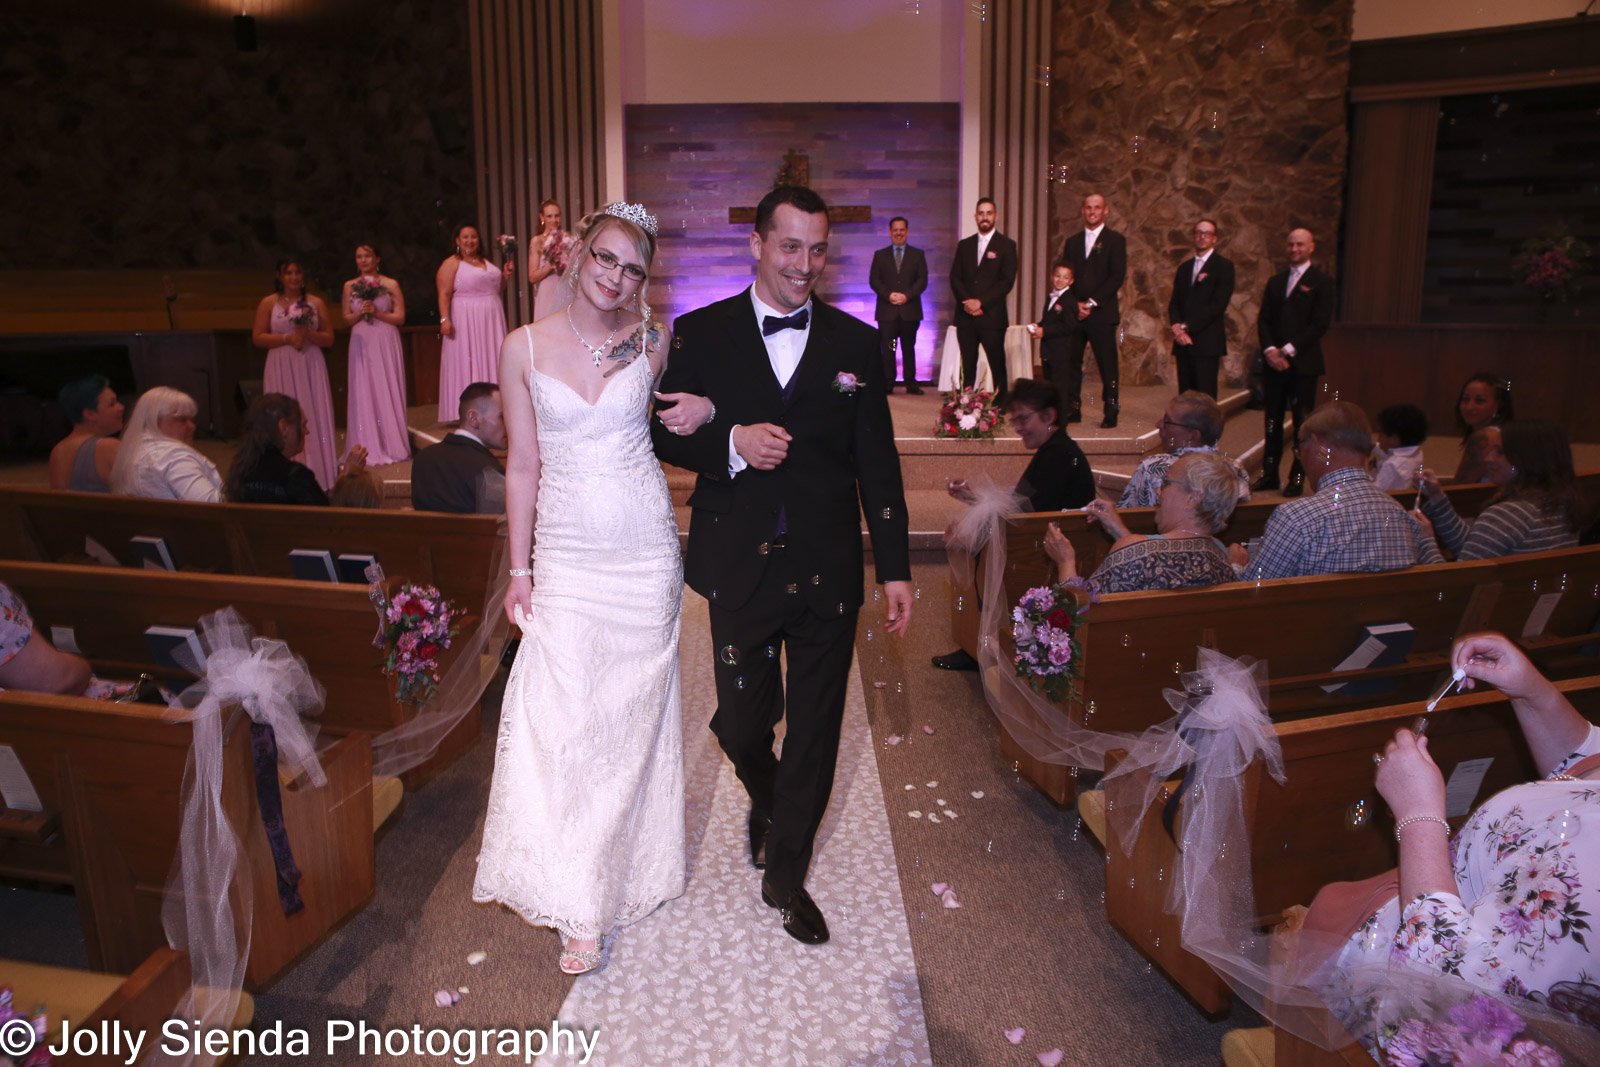 Husband and wife walks down the aisle in church wedding by Jolly